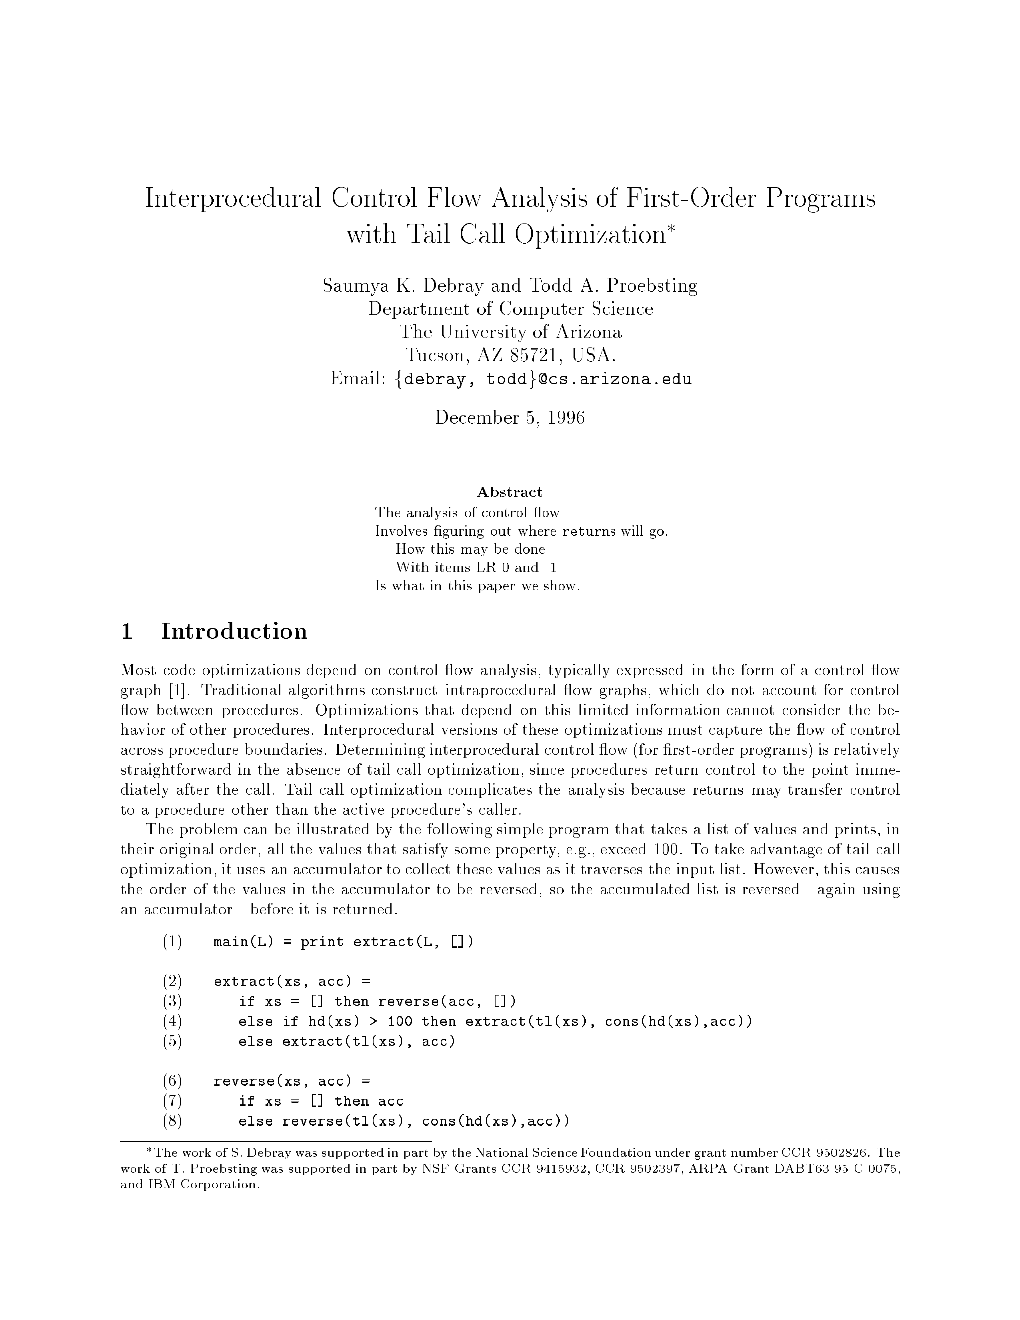 Interprocedural Control Flow Analysis of First-Order Programs with Tail Call Optimization 1 Introduction